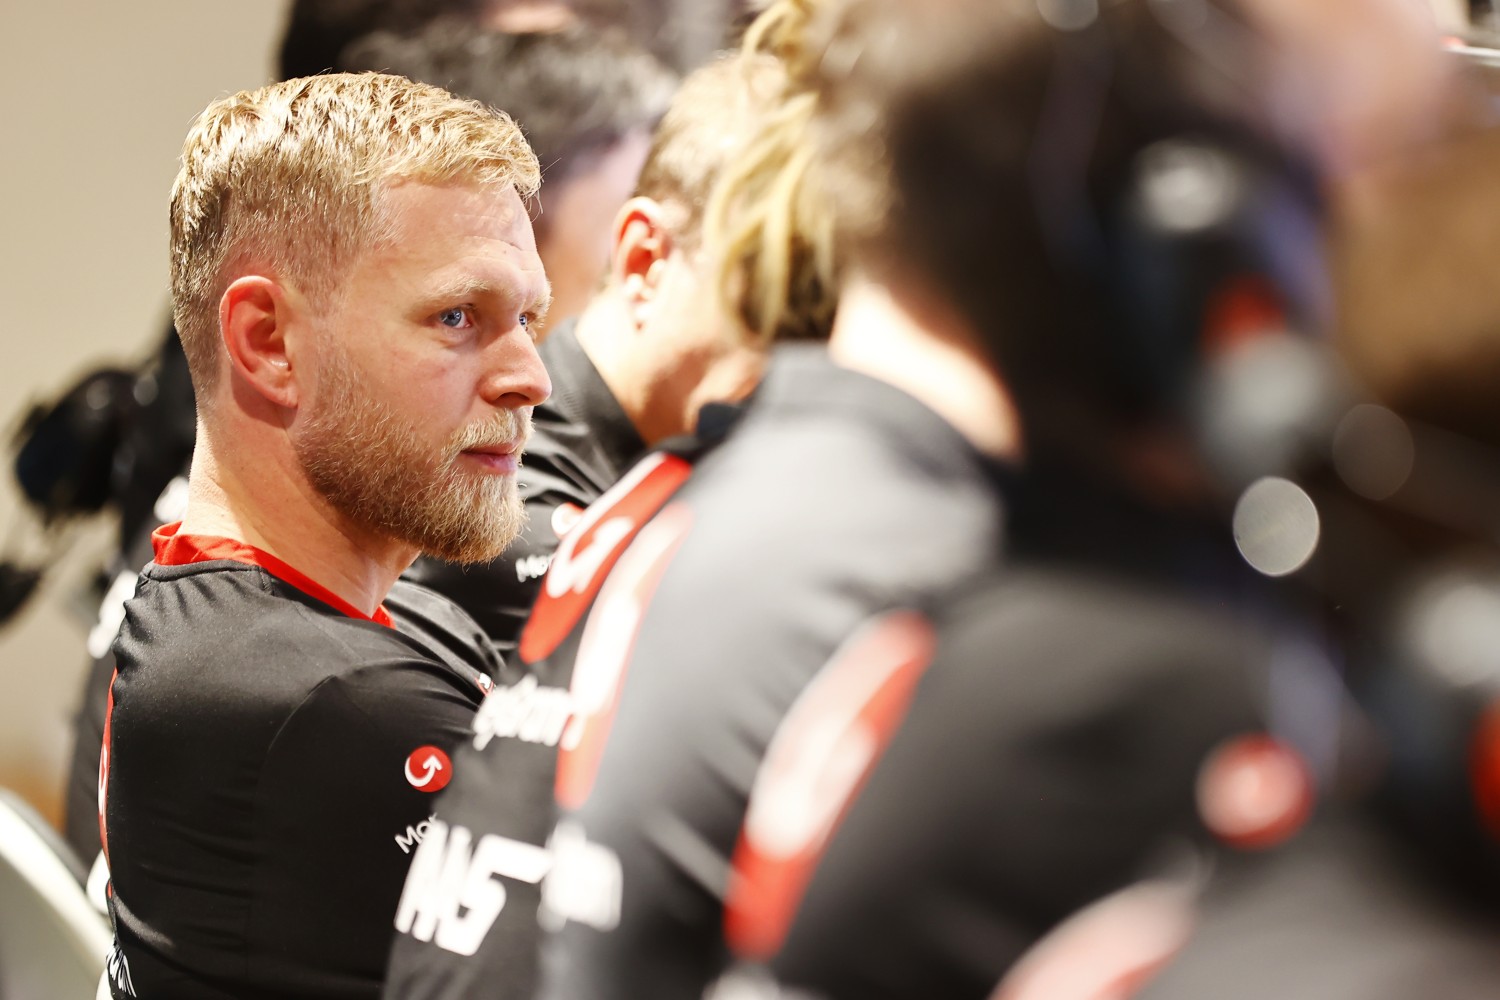 Kevin Magnussen, Haas F1 Team, with engineers during the Qatar GP at Losail International Circuit on Friday October 06, 2023 in Losail, Qatar. (Photo by Andy Hone / LAT Images)